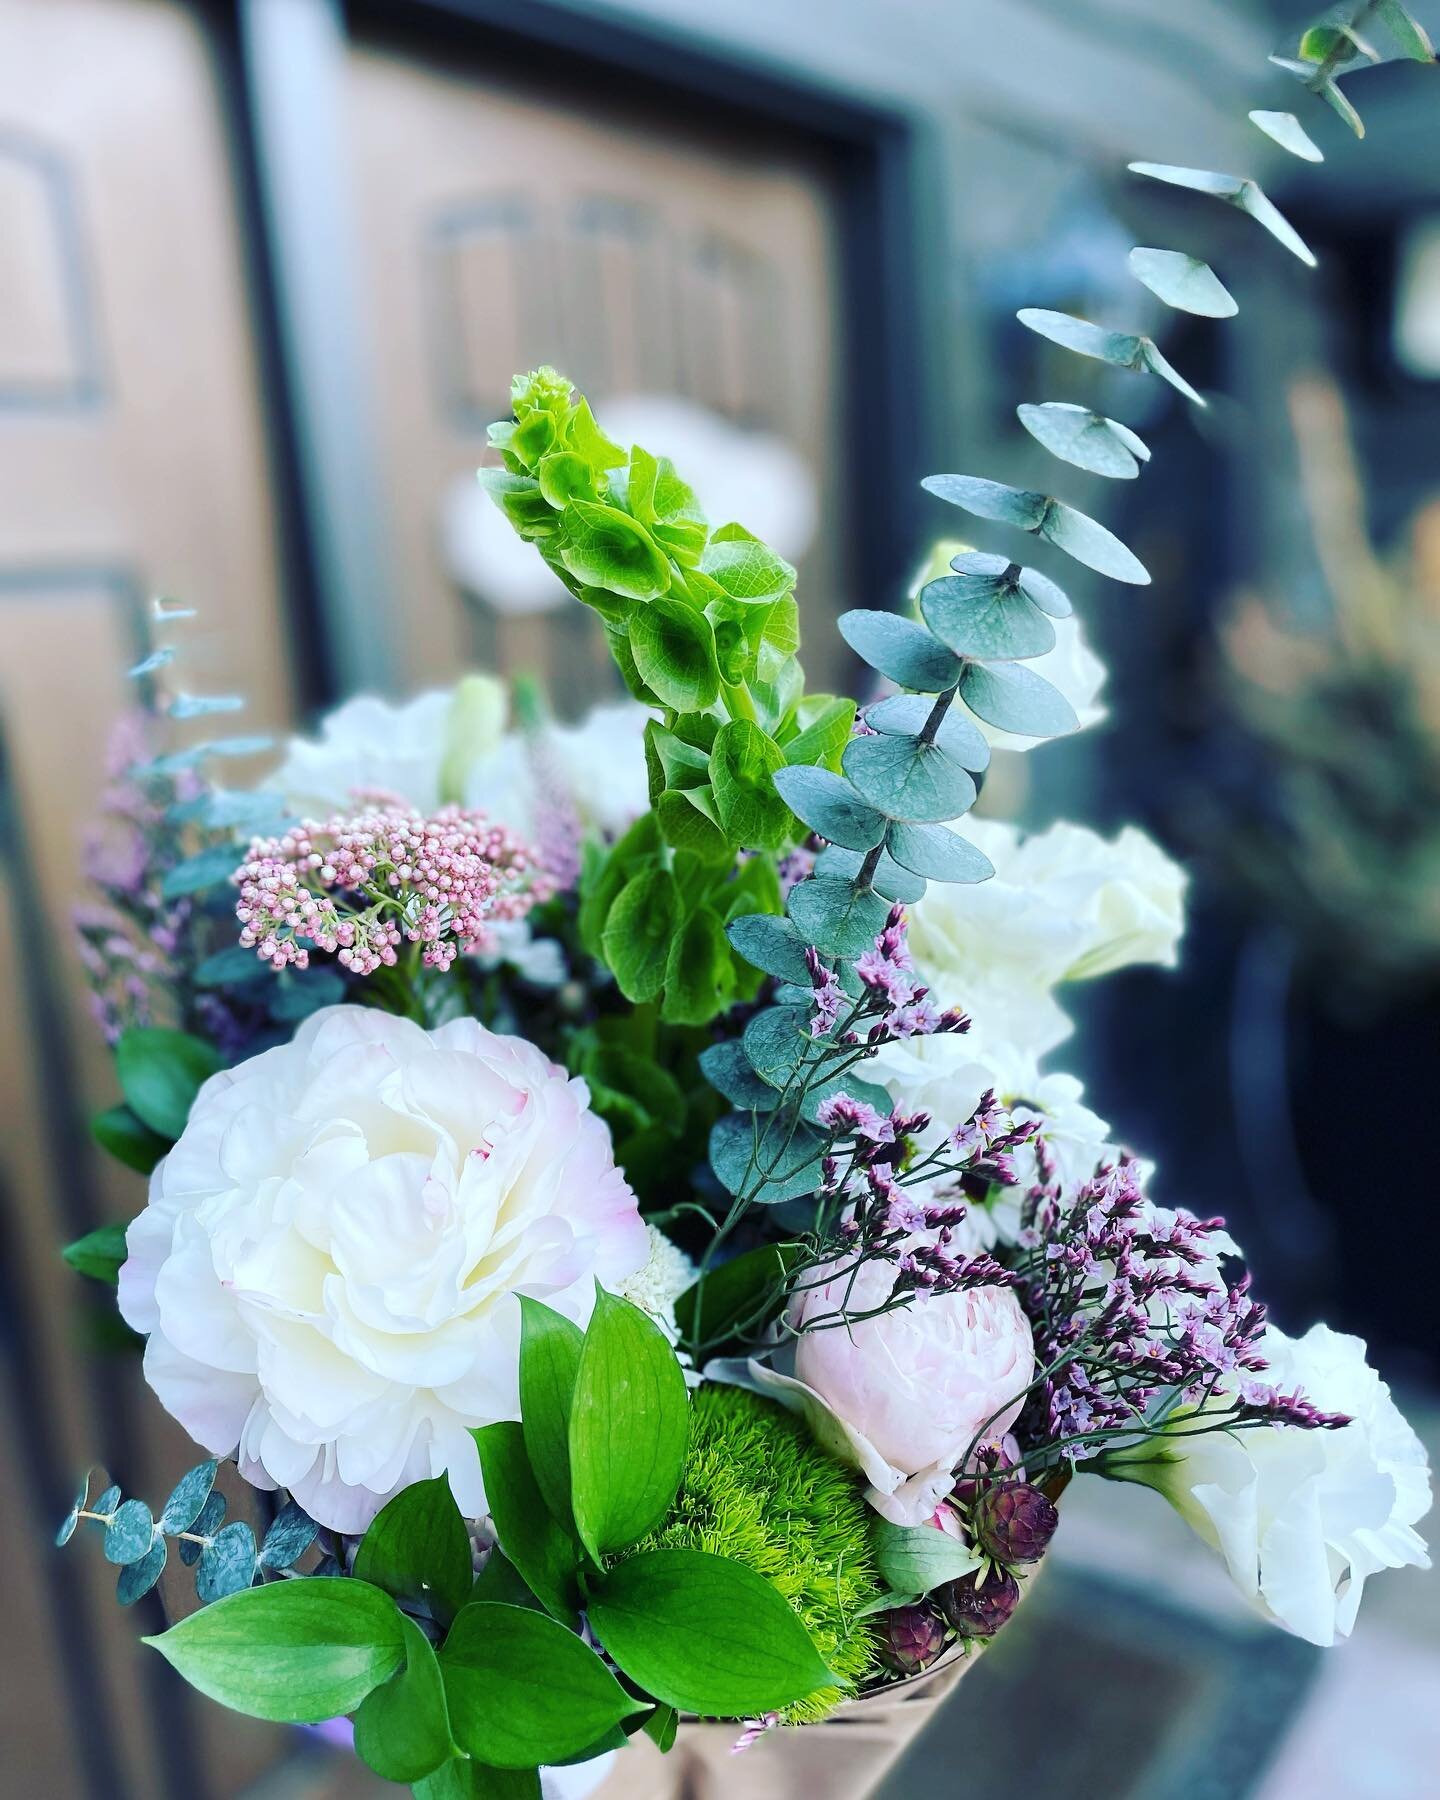 Mothers Day is just around the corner, we&rsquo;re fully stocked for all your fresh flower needs! 

If you haven&rsquo;t ordered yet, head over to our link in bio to place your order 💐💕

#yegflowers #yegbusiness #yegshoplocal #yeglocal #mothersday 